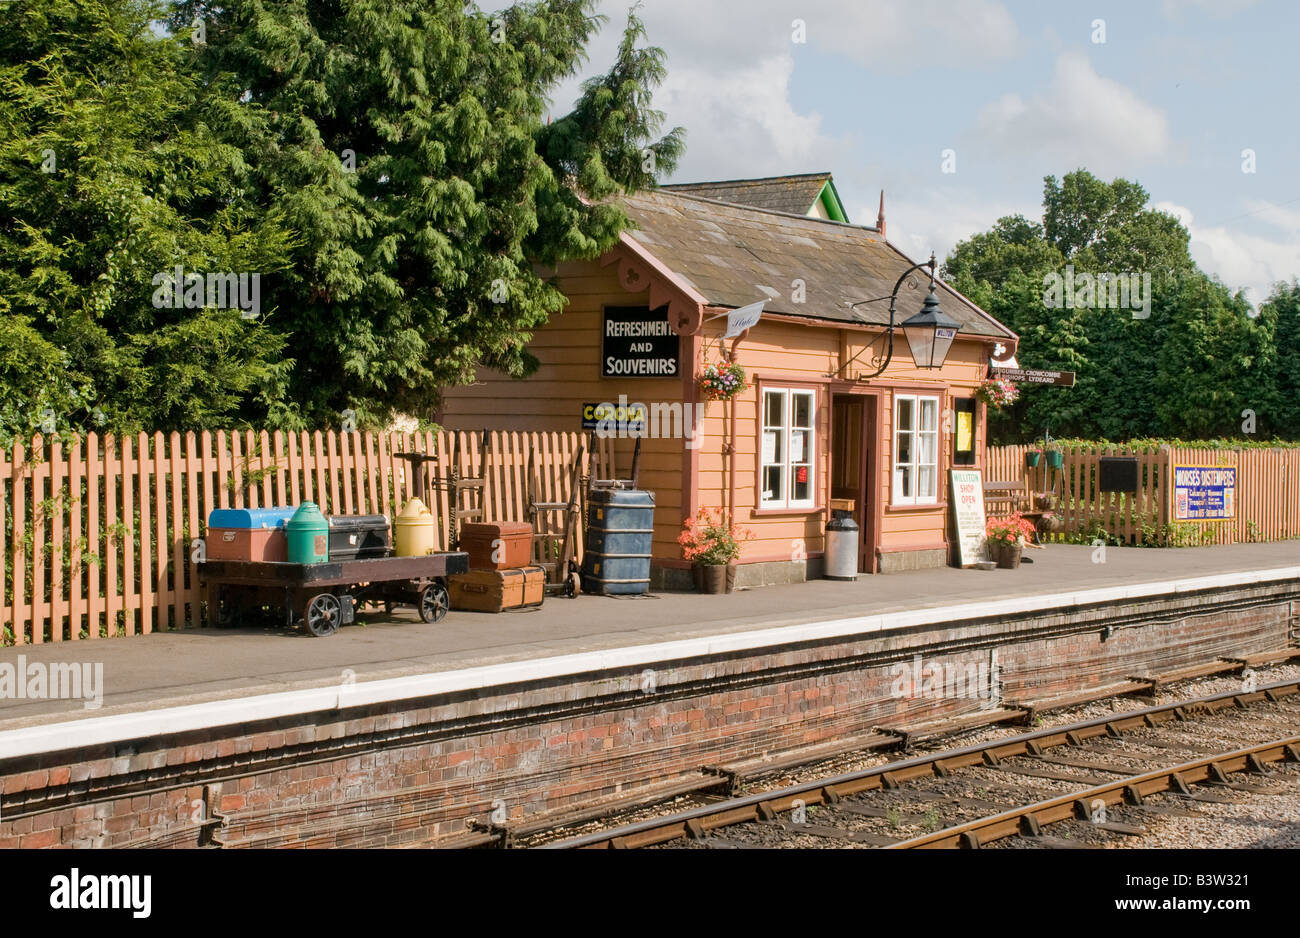 Tea and Coffee Kiosk at Williton Station on the Preserved West Somerset Railway West of England Stock Photo